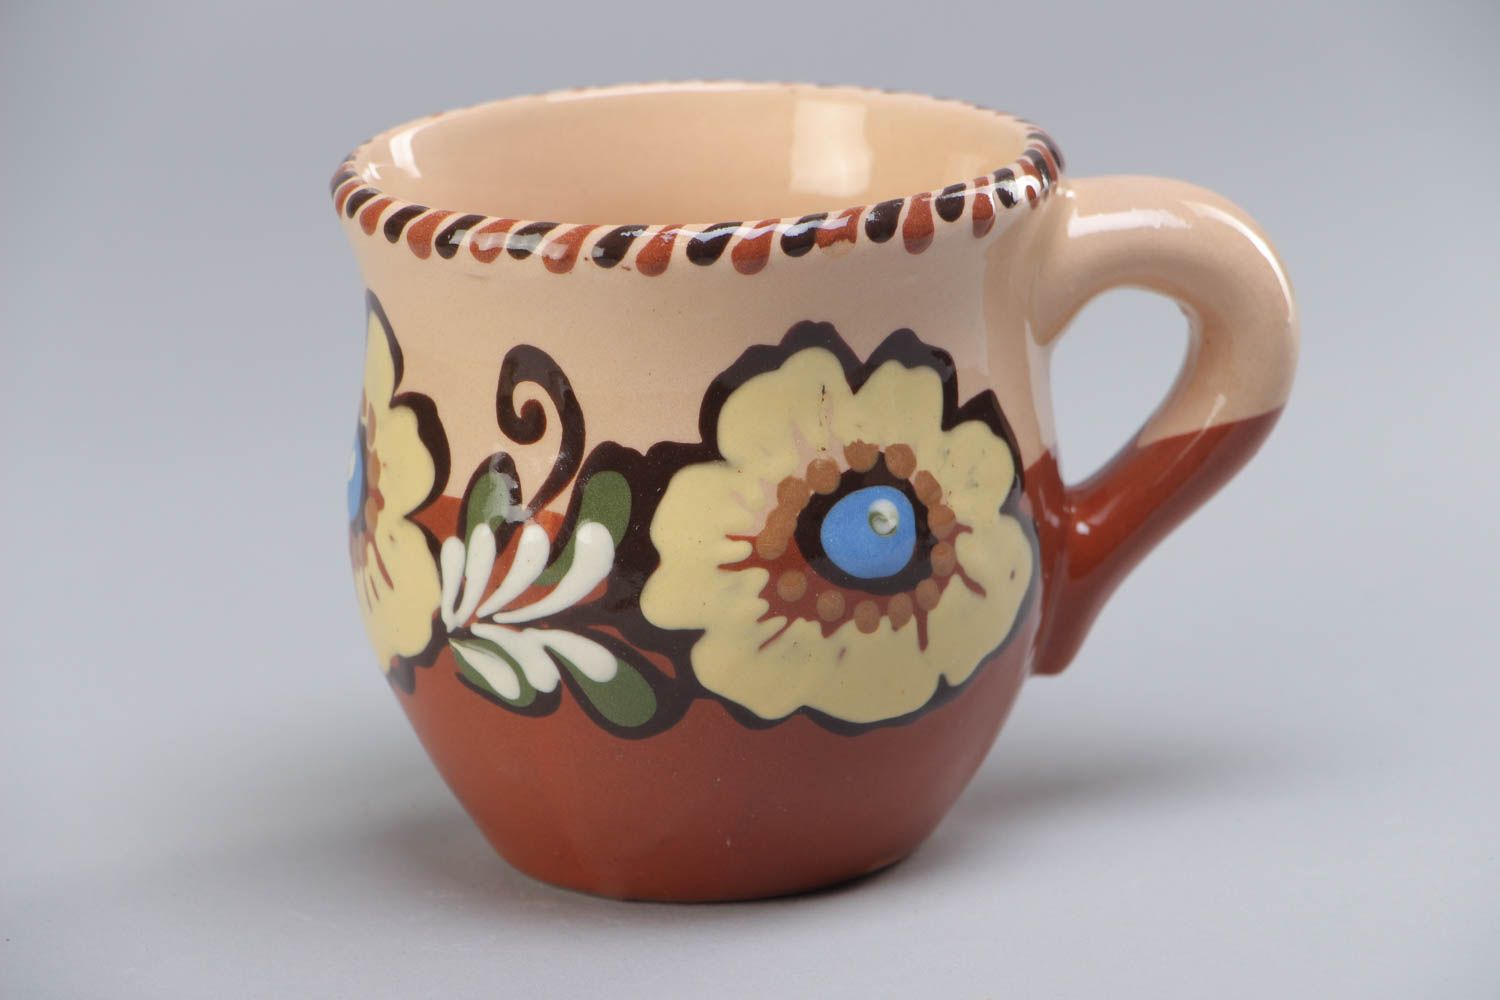 8 oz ceramic glazed clay drinking handmade cup with handle in brown and beige color with floral pattern photo 2